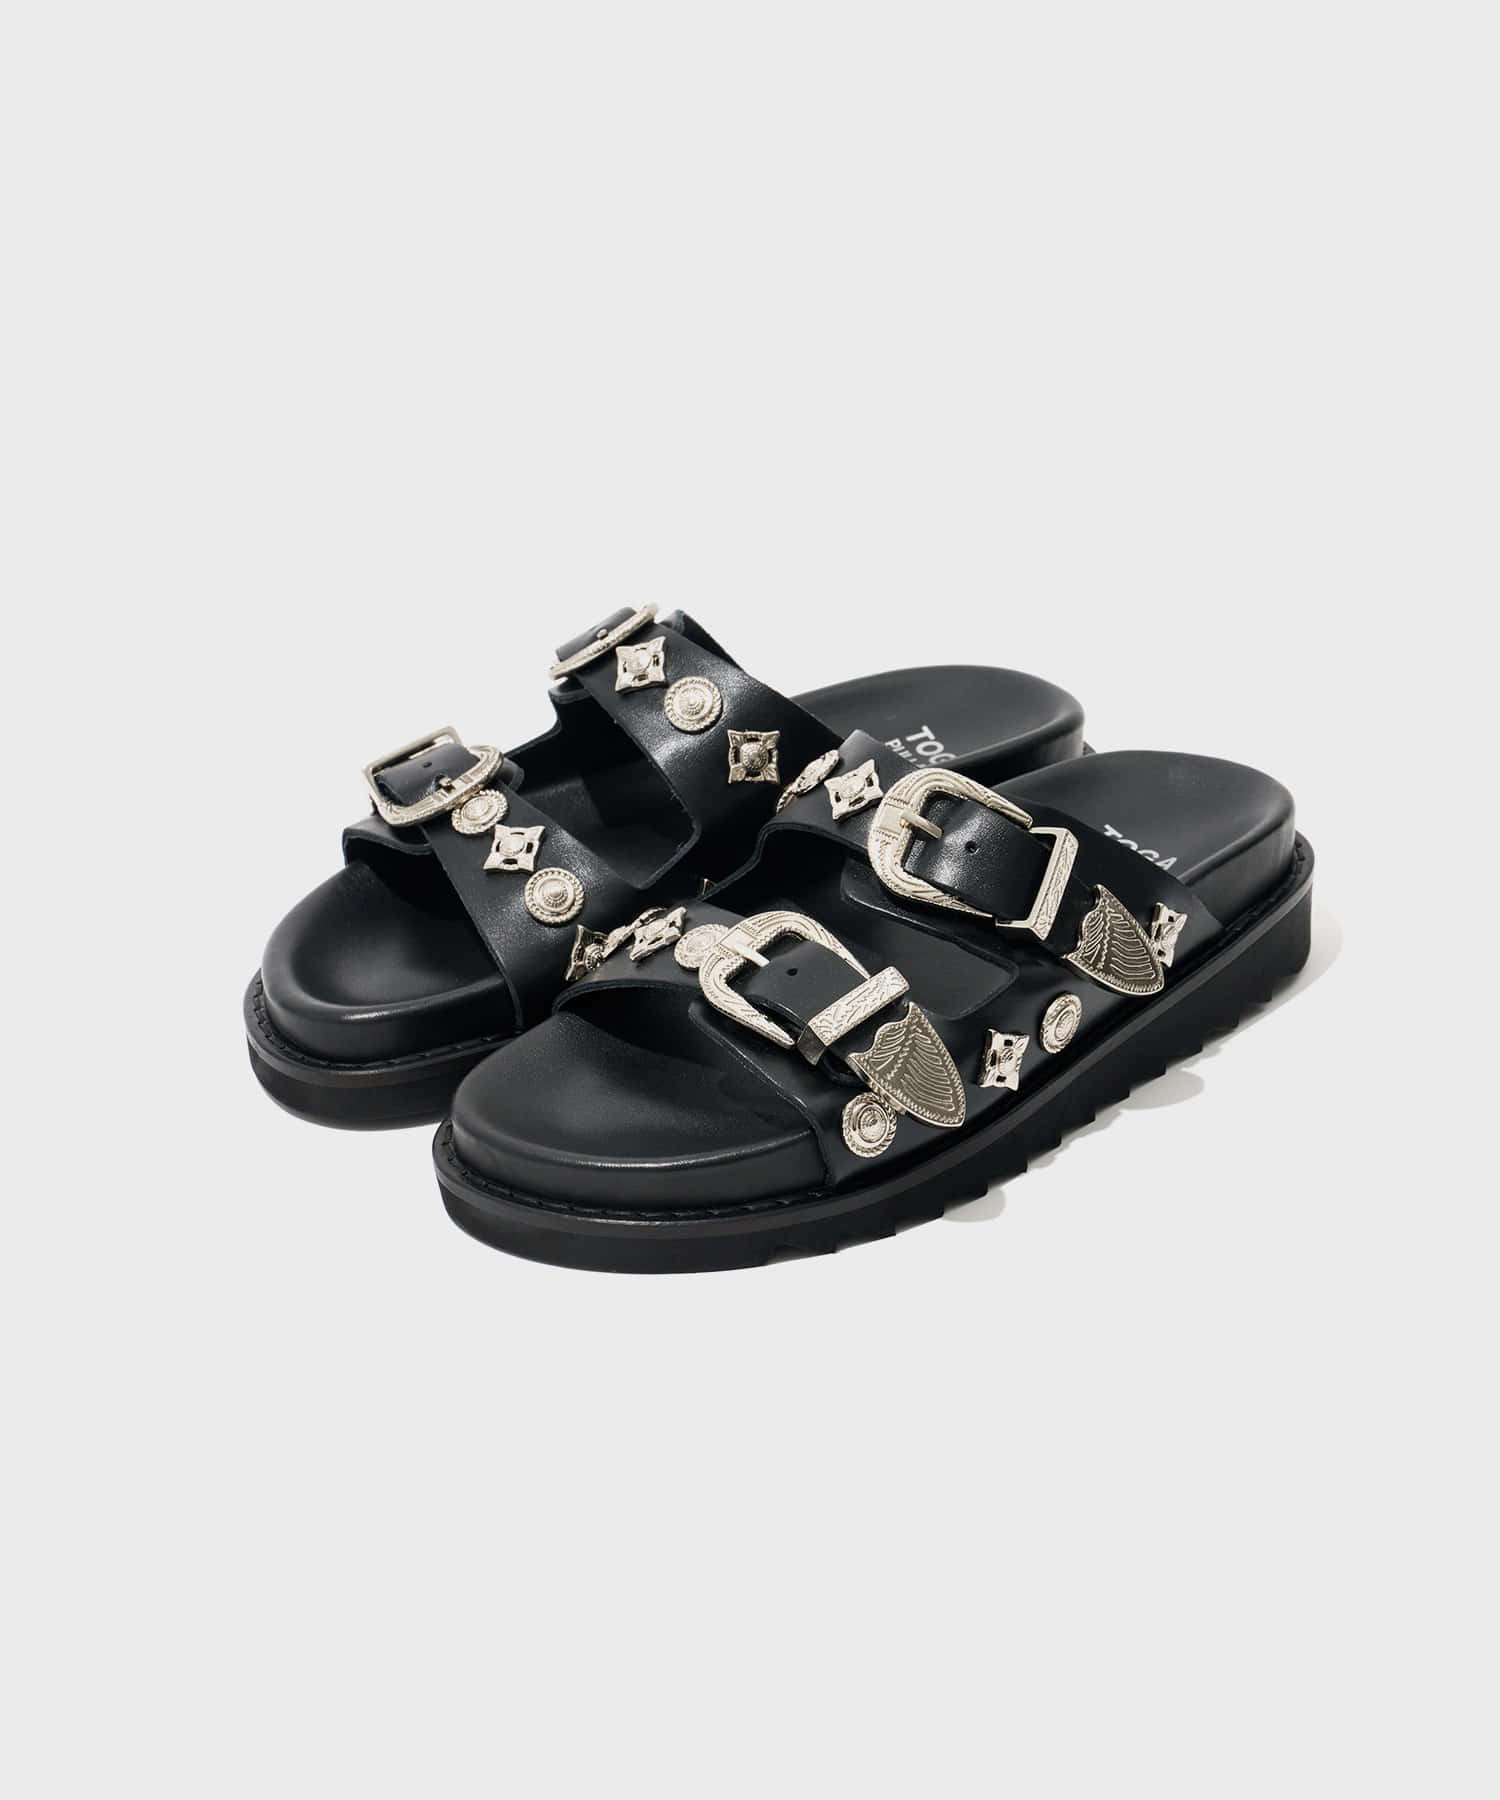 (w) Buckle Sandals (Black Leather)